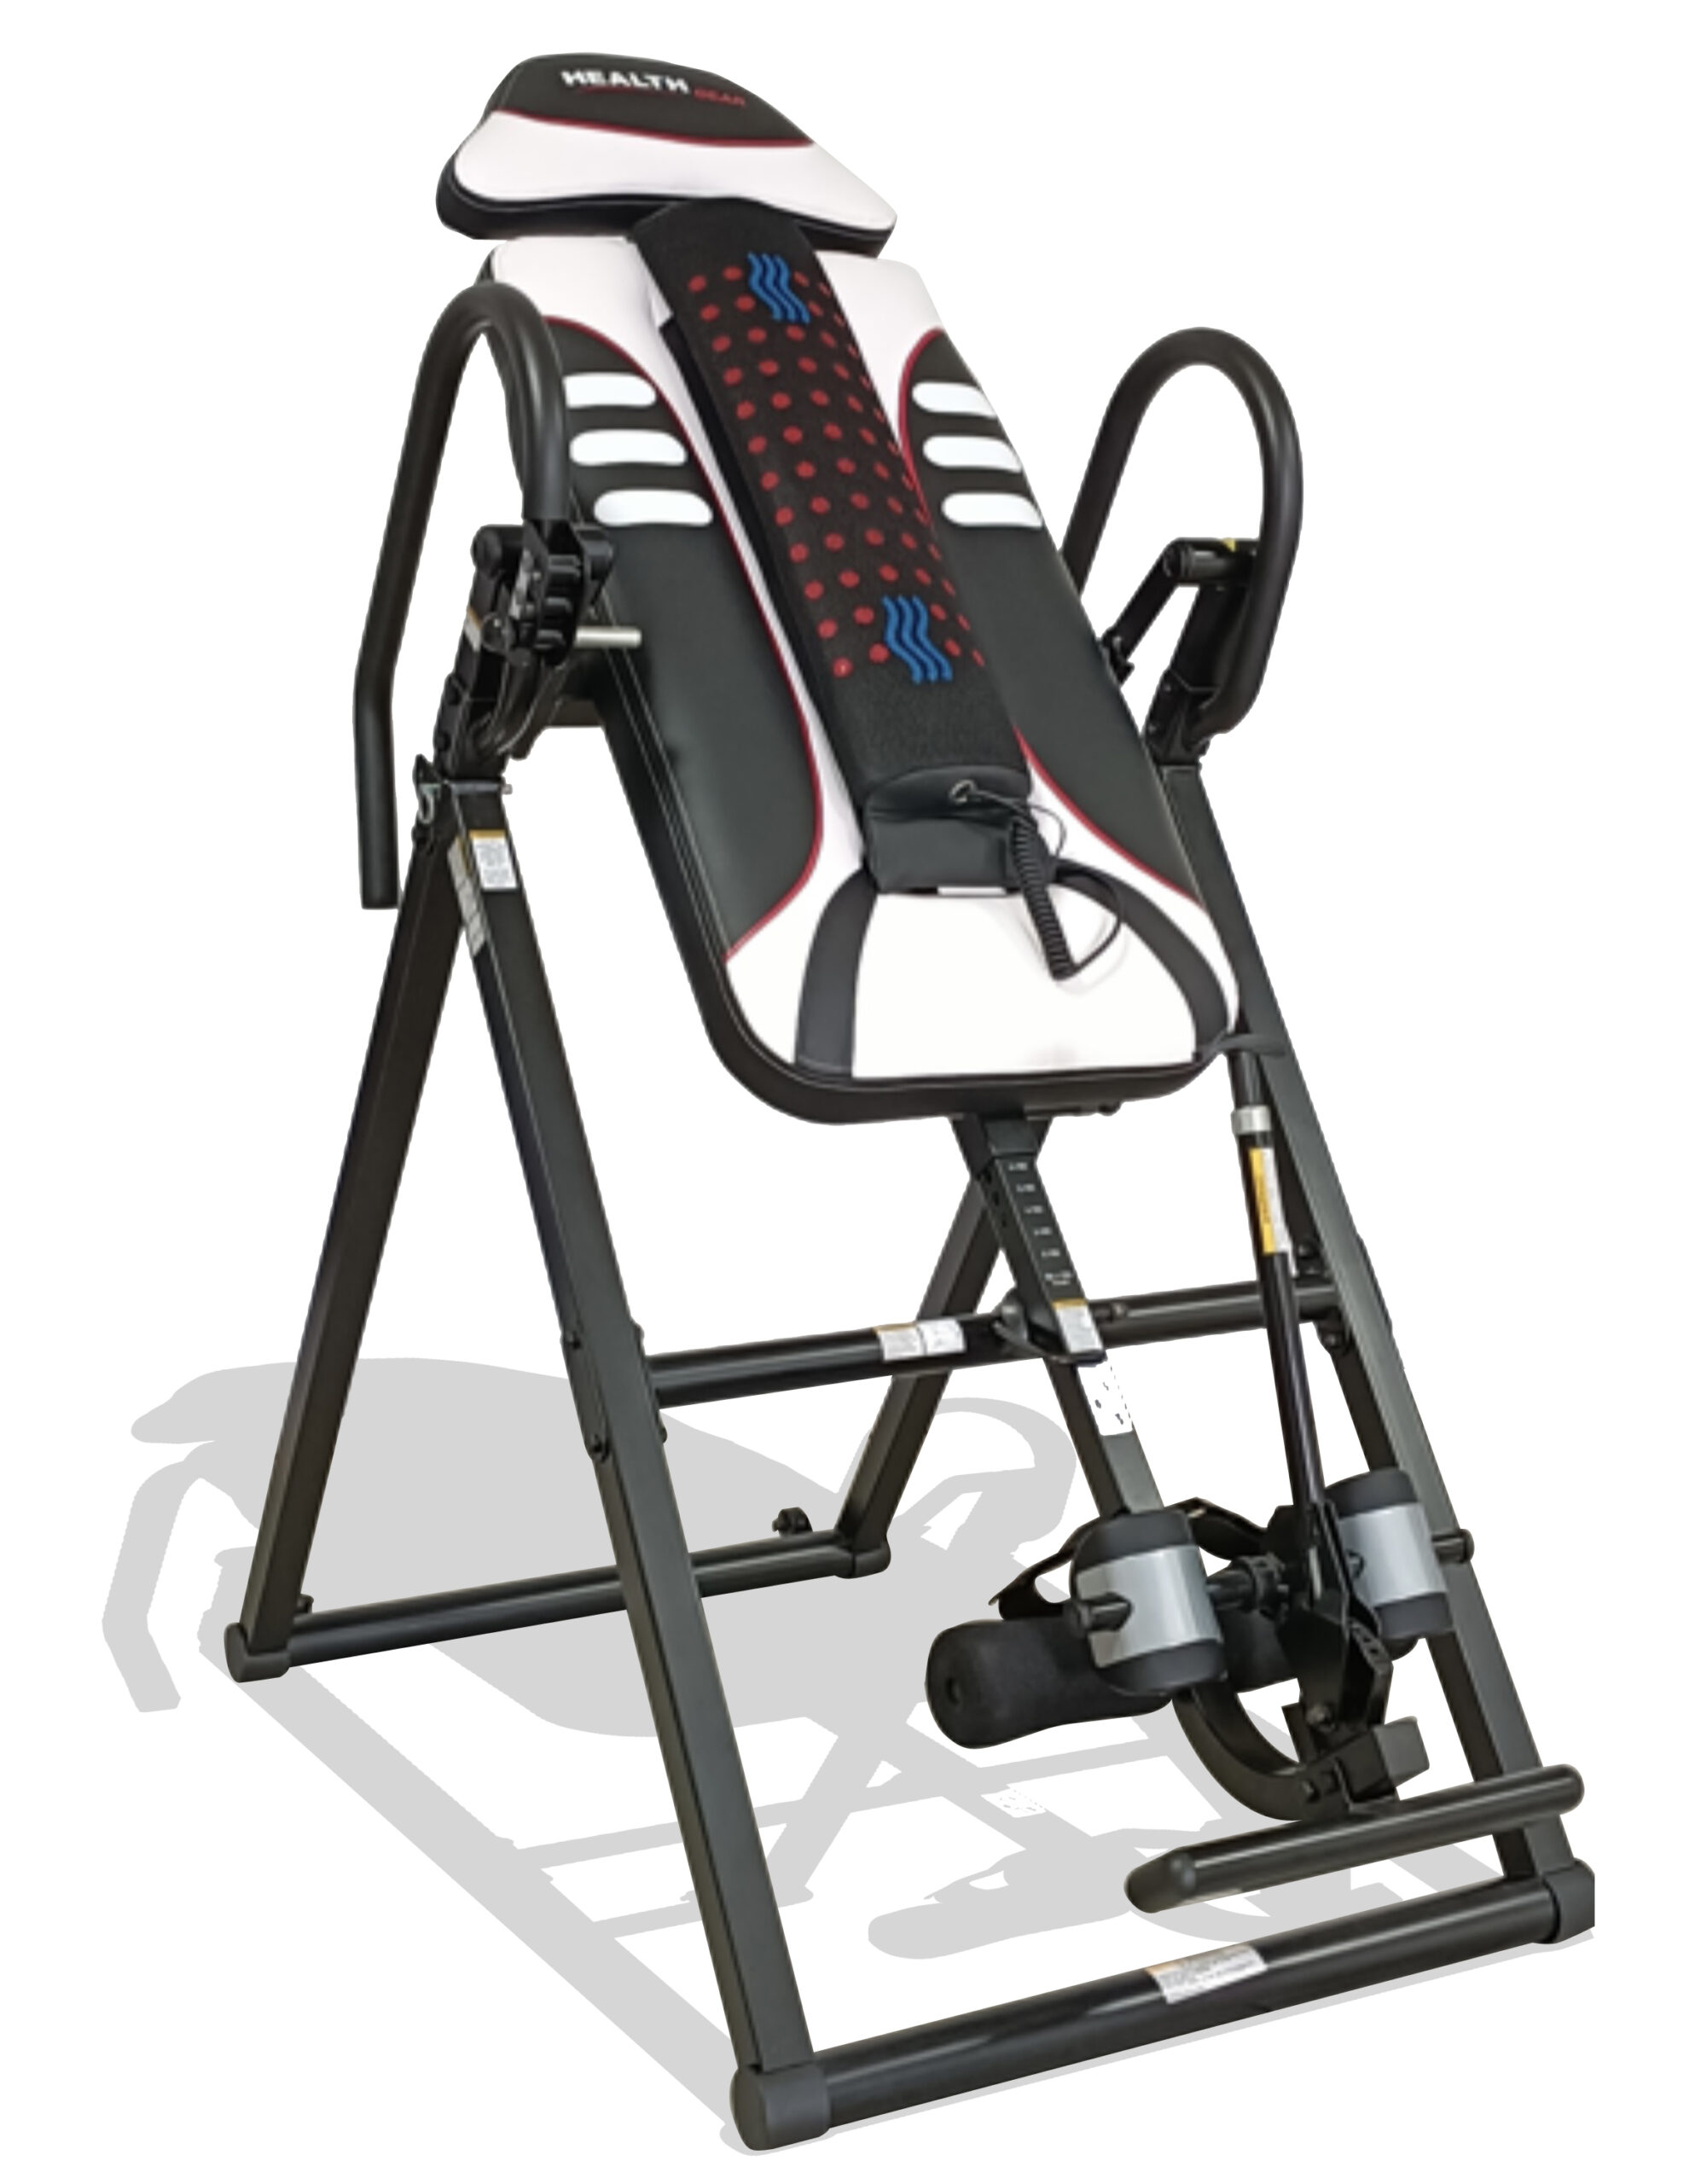 Premium HGI 9.3 Inversion Table with Enhanced Ergonomic Support and Advanced Safety Features for Superior Back Pain Relief.